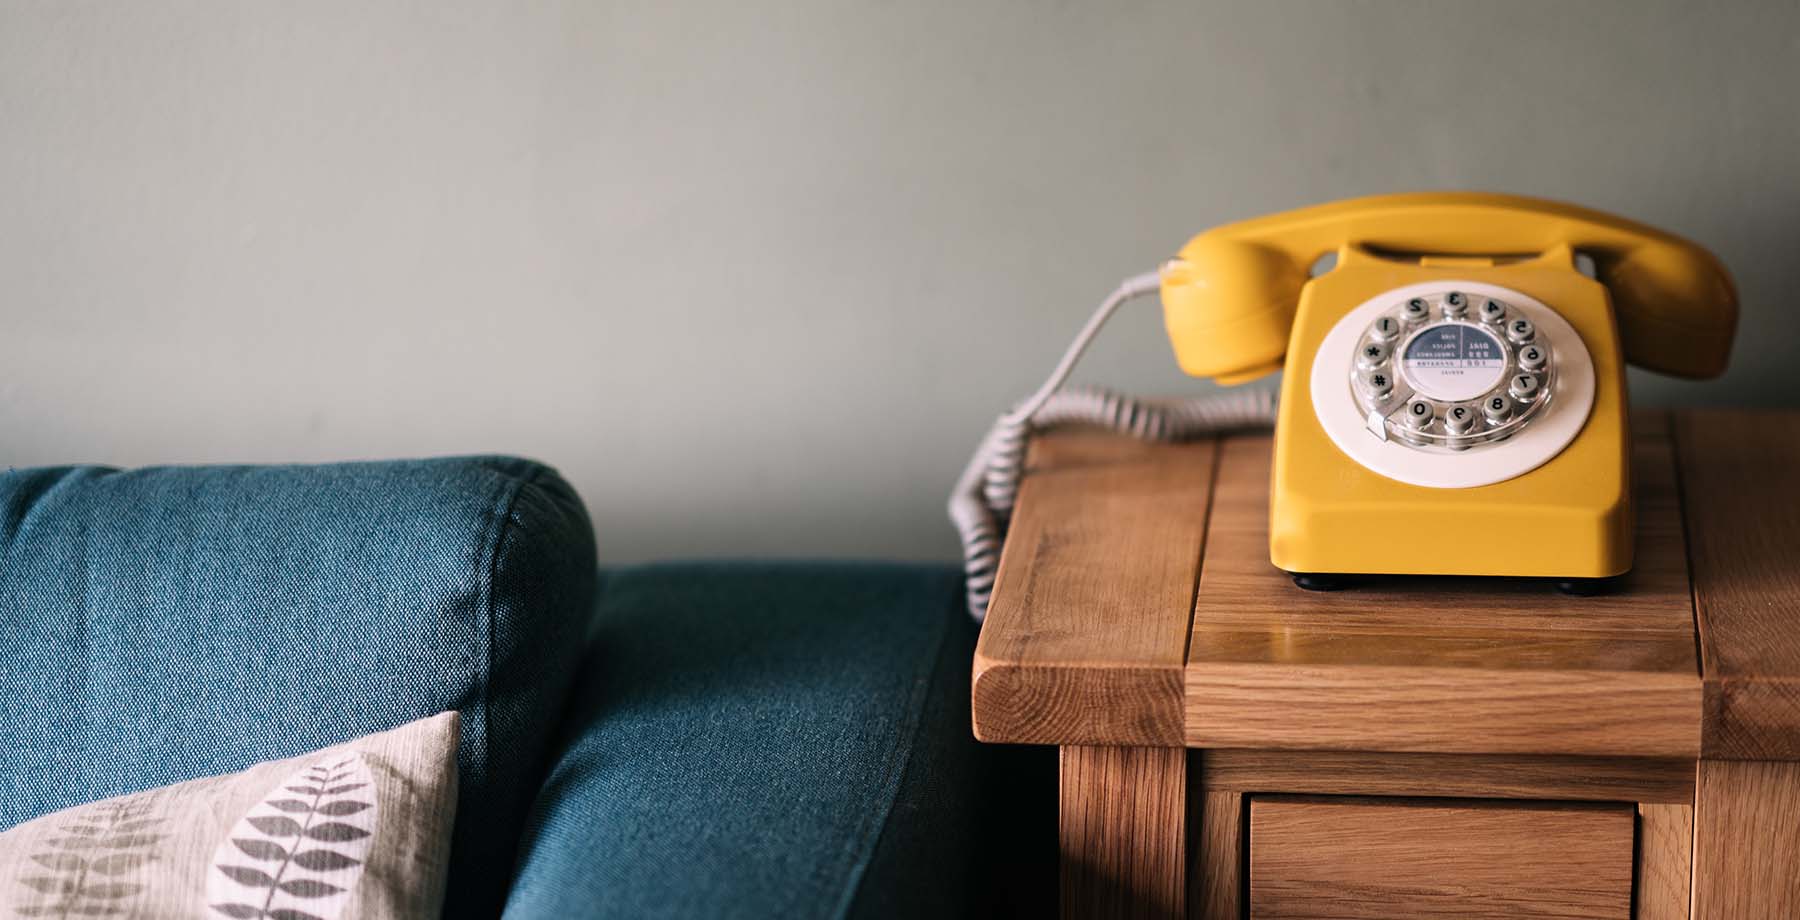 Yellow rotary phone sits on side table next to a couch